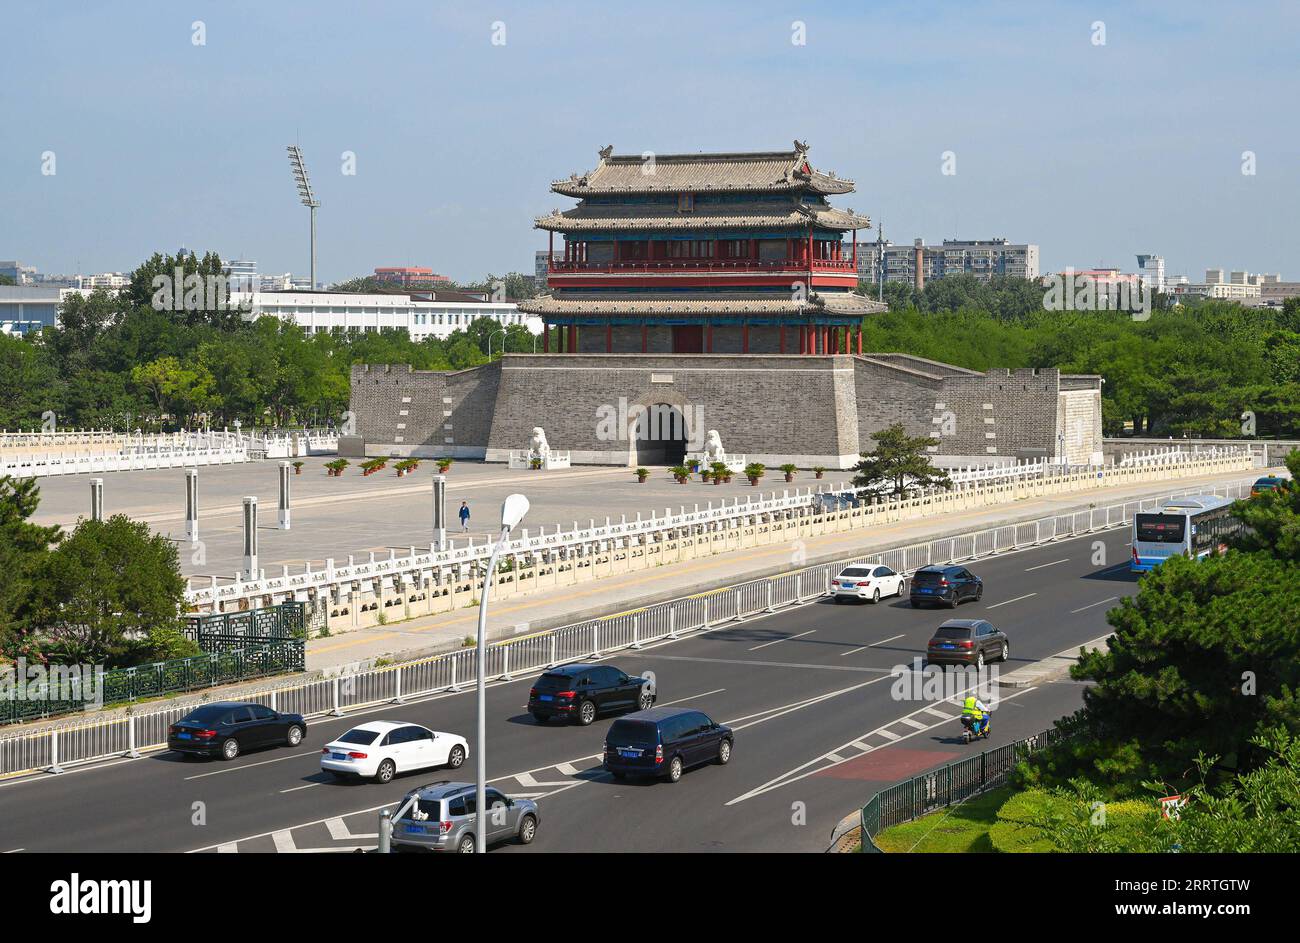 230725 -- BEIJING, July 25, 2023 -- This photo taken on July 10, 2023 shows the Yongding Gate in Beijing, capital of China. First created in the Yuan Dynasty 1271-1368, the Beijing Central Axis, or Zhongzhouxian, stretches 7.8 kilometers between the Yongding Gate in the south of the city and the Drum Tower and Bell Tower in the north. Most of the major old-city buildings of Beijing sit along this axis. Gates, palaces, temples, squares and gardens of the old city are all linked up to the axis. As they witnessed the folk activities along the line from old days to new ones, they themselves are a Stock Photo